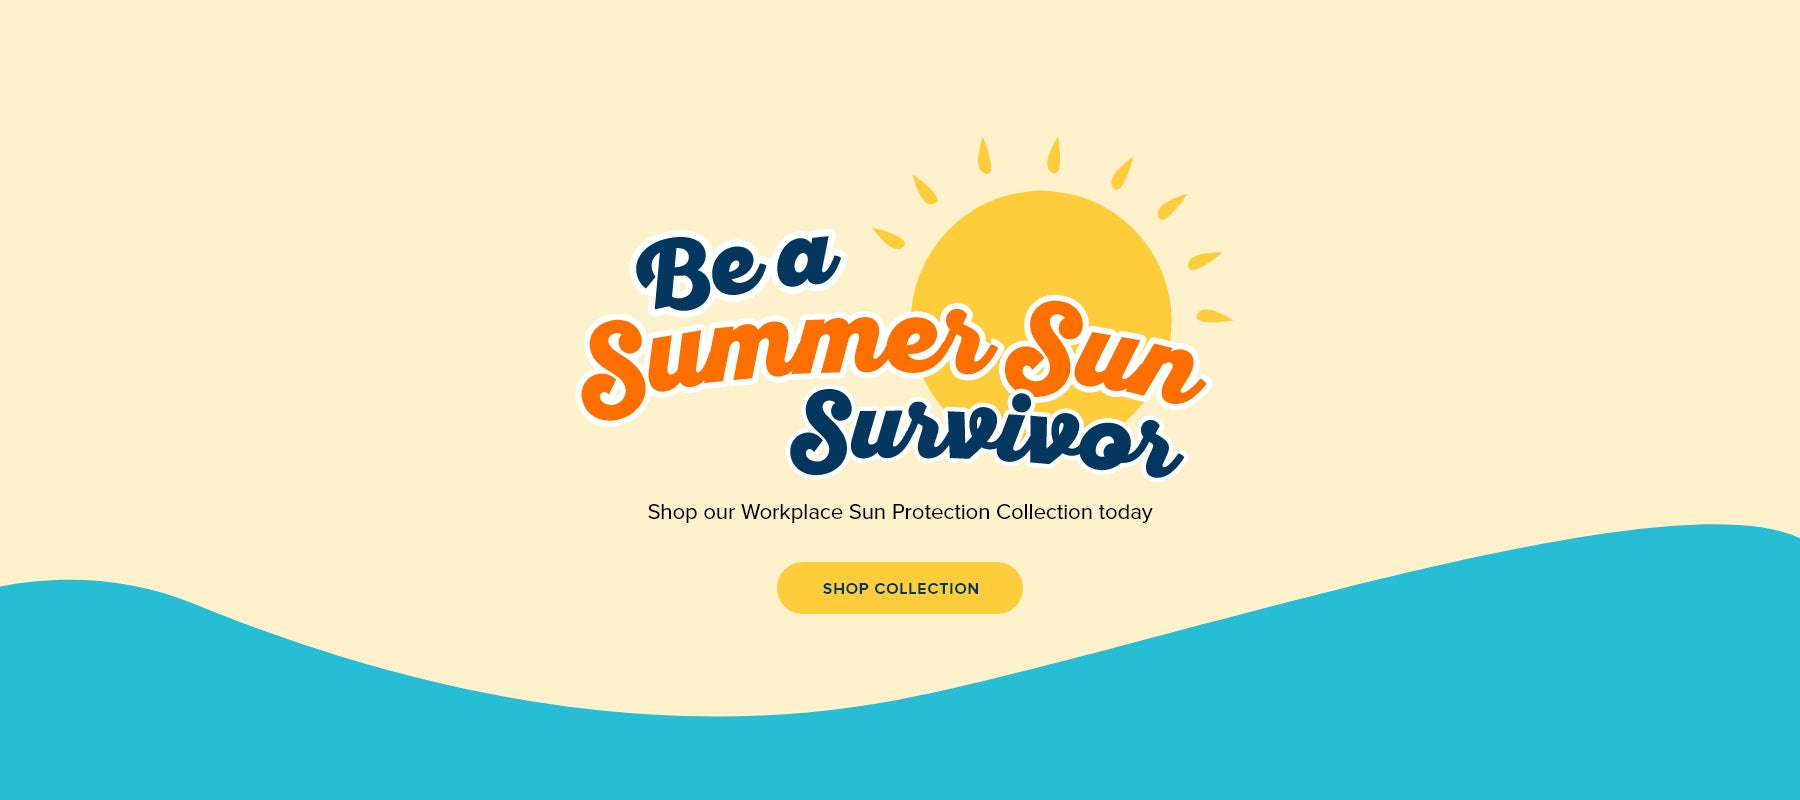 Be a Summer Sun Survivor. Shop our Workplace Sun Protection Collection today